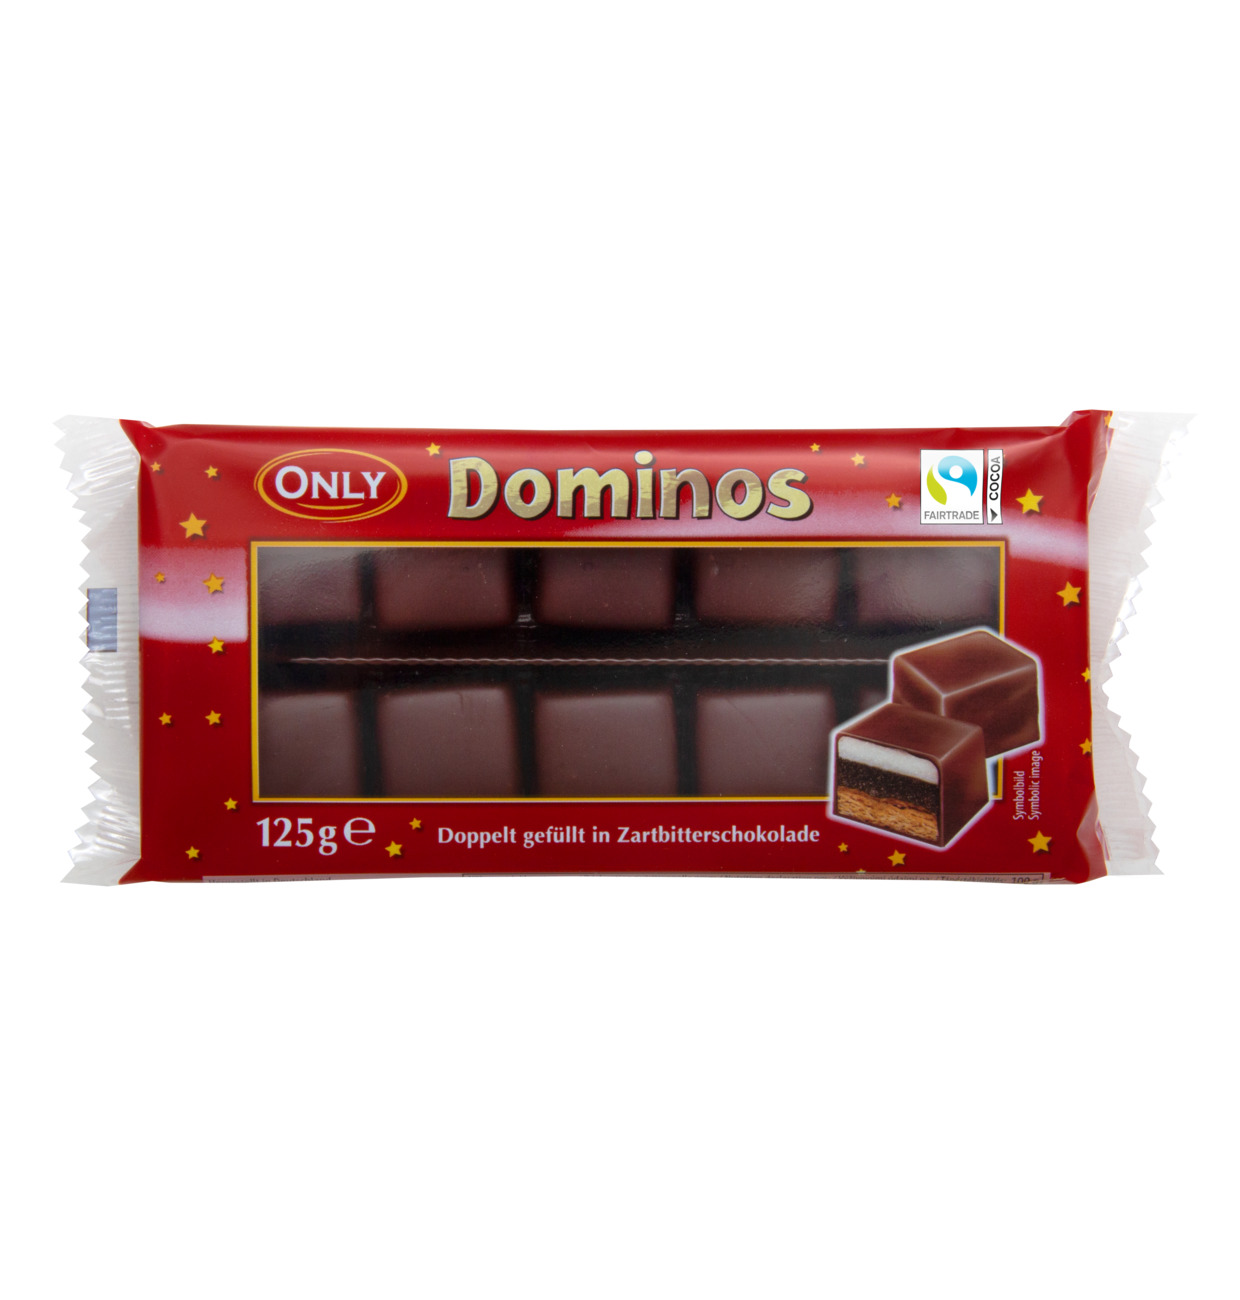 Only Domino &#1082;&#1091;&#1073;&#1080;&#1082;&#1080; &#1089; &#1090;&#1105;&#1084;&#1085;&#1099;&#1084; &#1096;&#1086;&#1082;&#1086;&#1083;&#1072;&#1076;&#1086;&#1084; 125 &#1075;